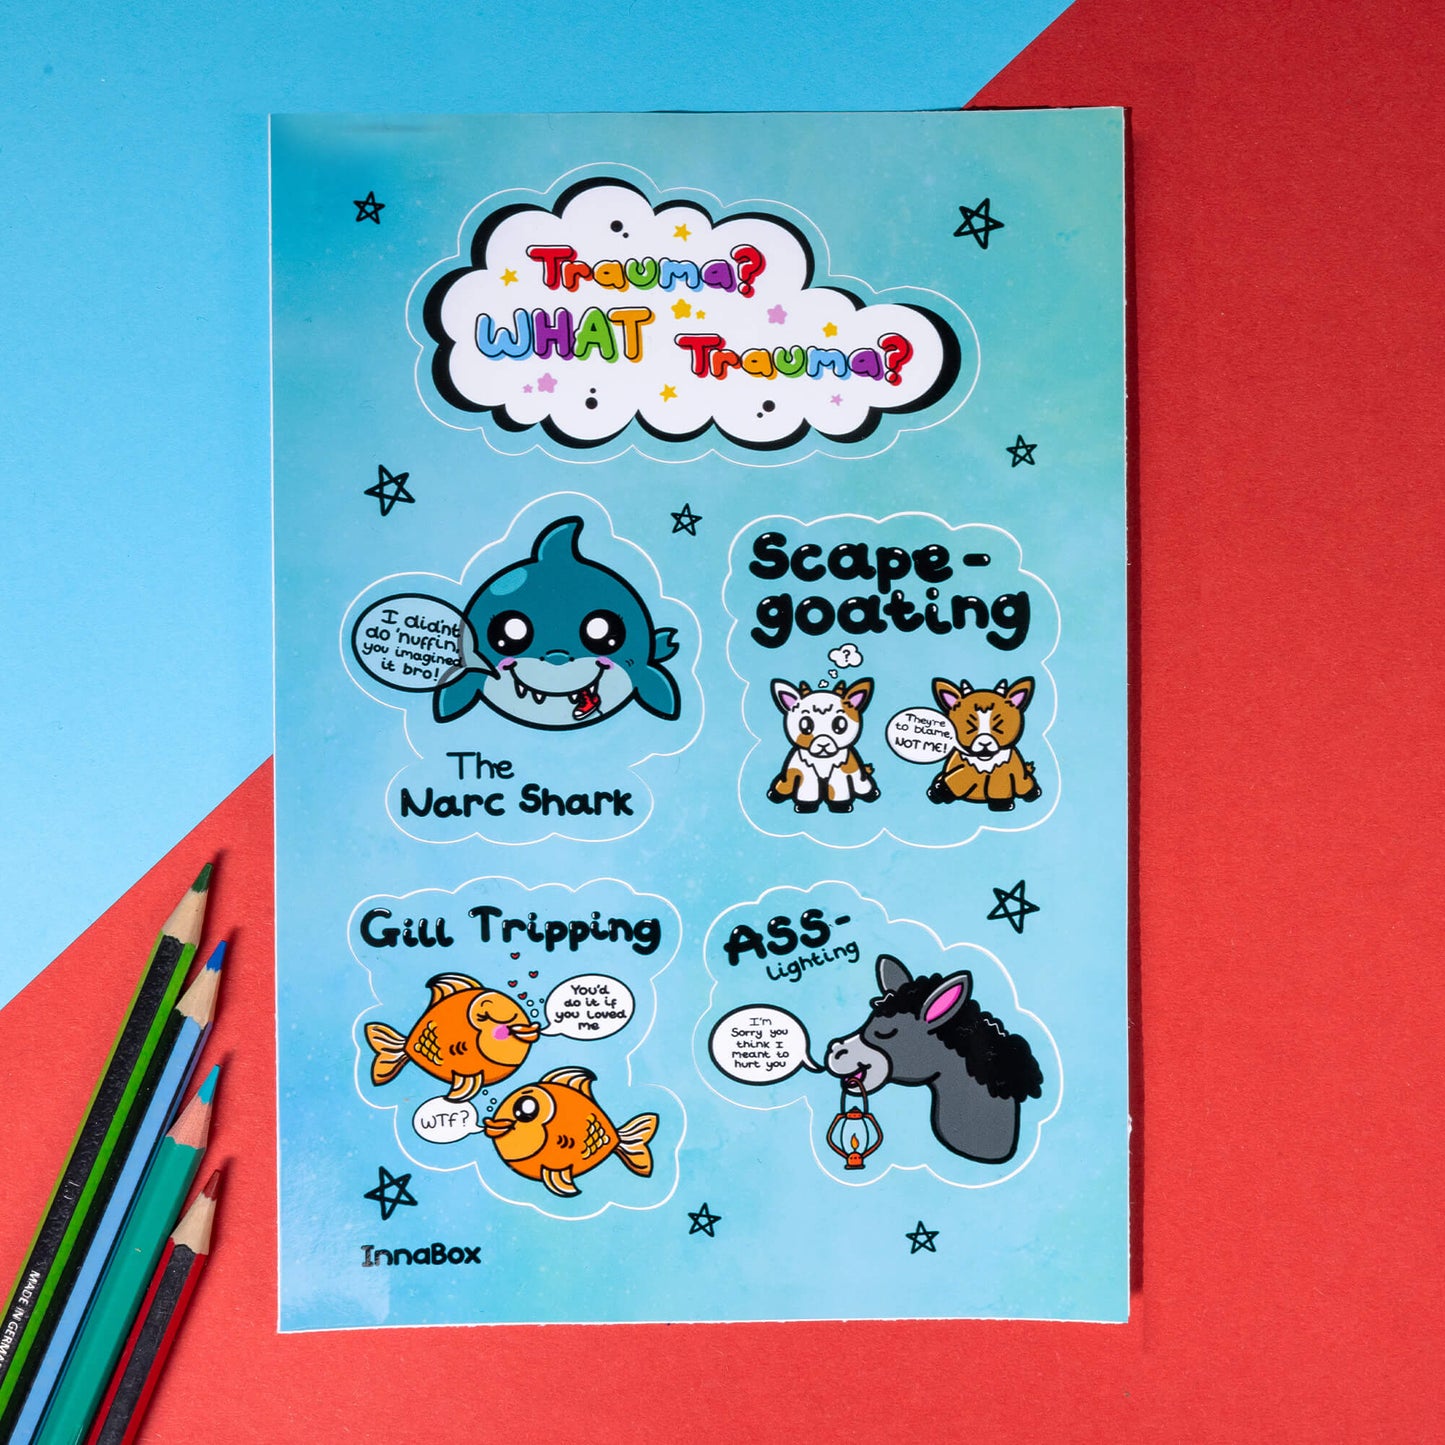 The Trauma? What Trauma? Sticker Sheet - A6 Sticker Sheet on a red and blue background with colouring pencils. The vinyl sticker sheet features 5 different designs based on types of trauma. There's a white cloud with rainbow bubble writing reading 'trauma? what trauma?', the narc shark - a smiling shark, scape-goating - two goats, Gill Tripping - two goldfish and Ass-Lighting - a donkey holding a lantern.